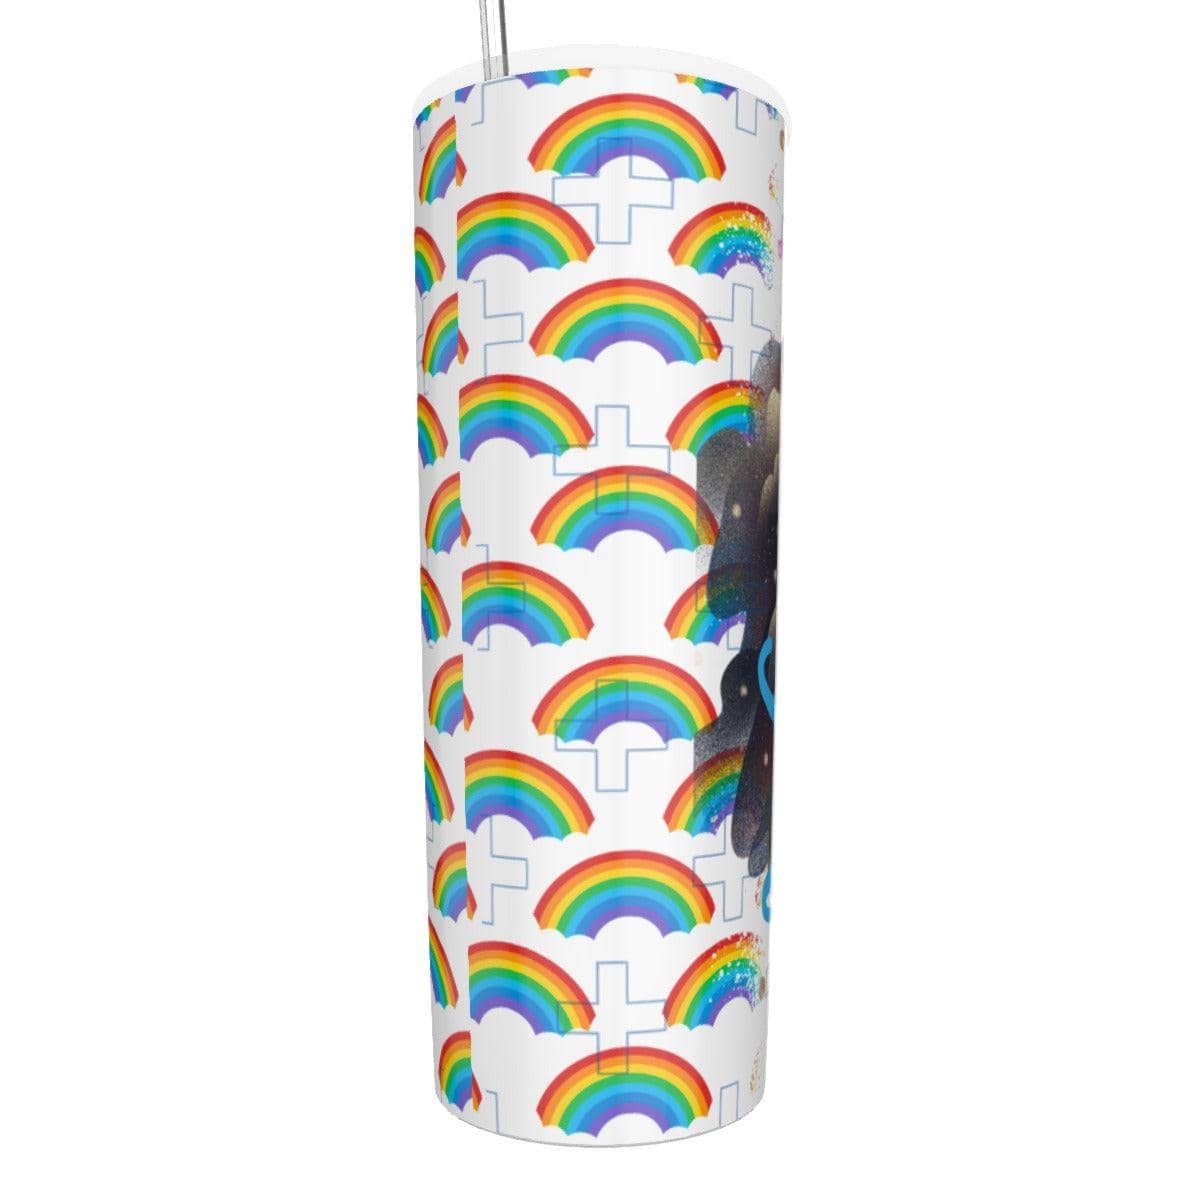 Nurse Rainbow and Clouds tumbler personalized gift for doctor nurse appreciation gift for RN personalized tumbler gift grad medic insulated coffee travel cup - Thumbedtreats